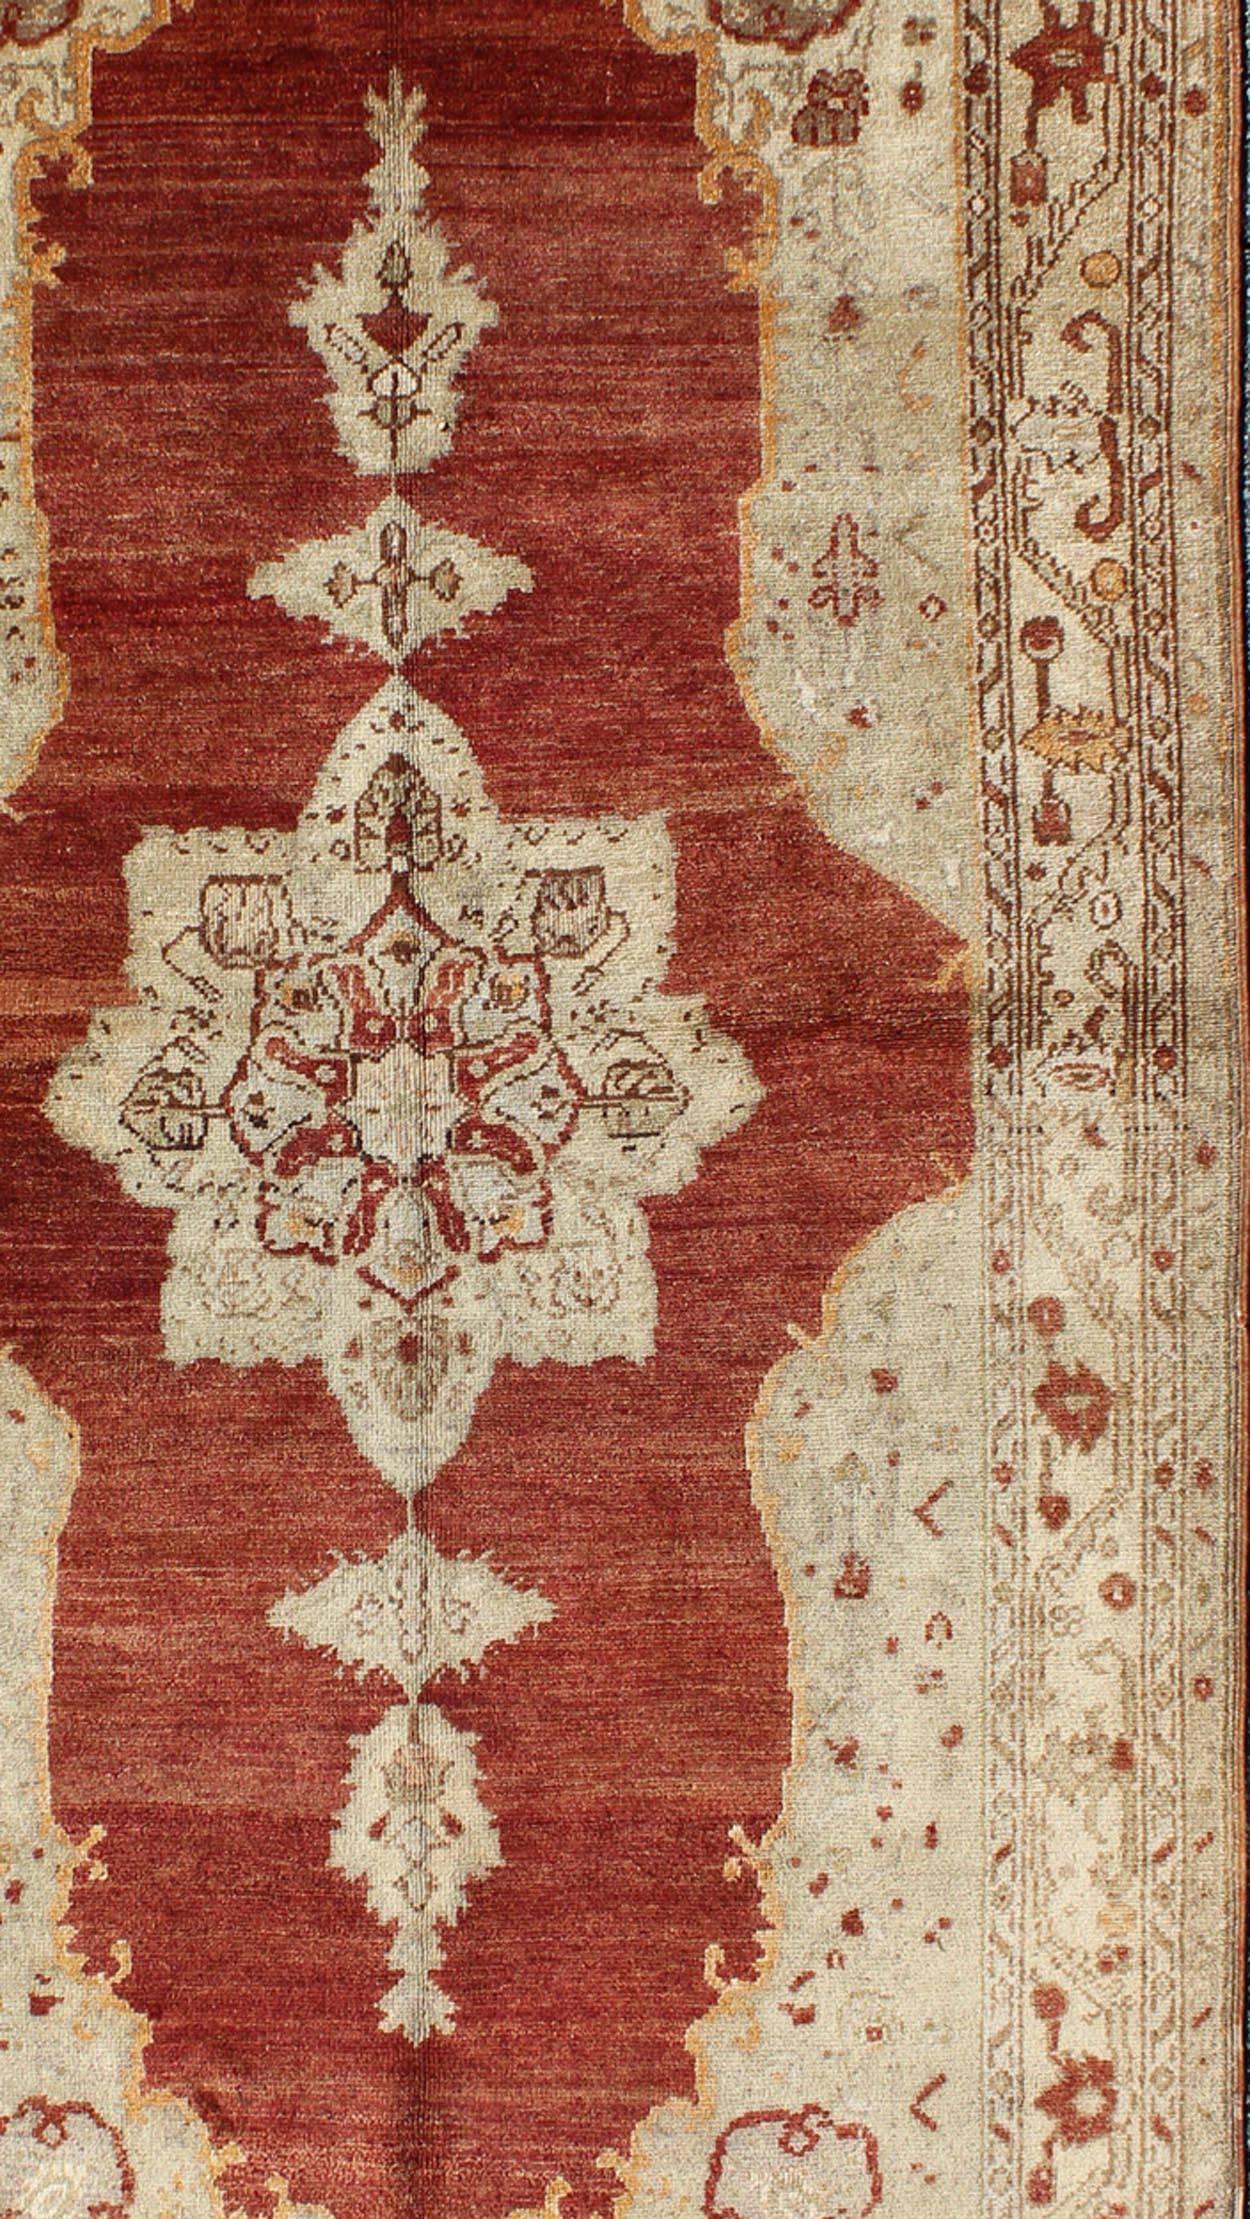 Antique Turkish Oushak Rug with Stretched Medallion in Red, Ivory, Cream, Gray In Excellent Condition For Sale In Atlanta, GA